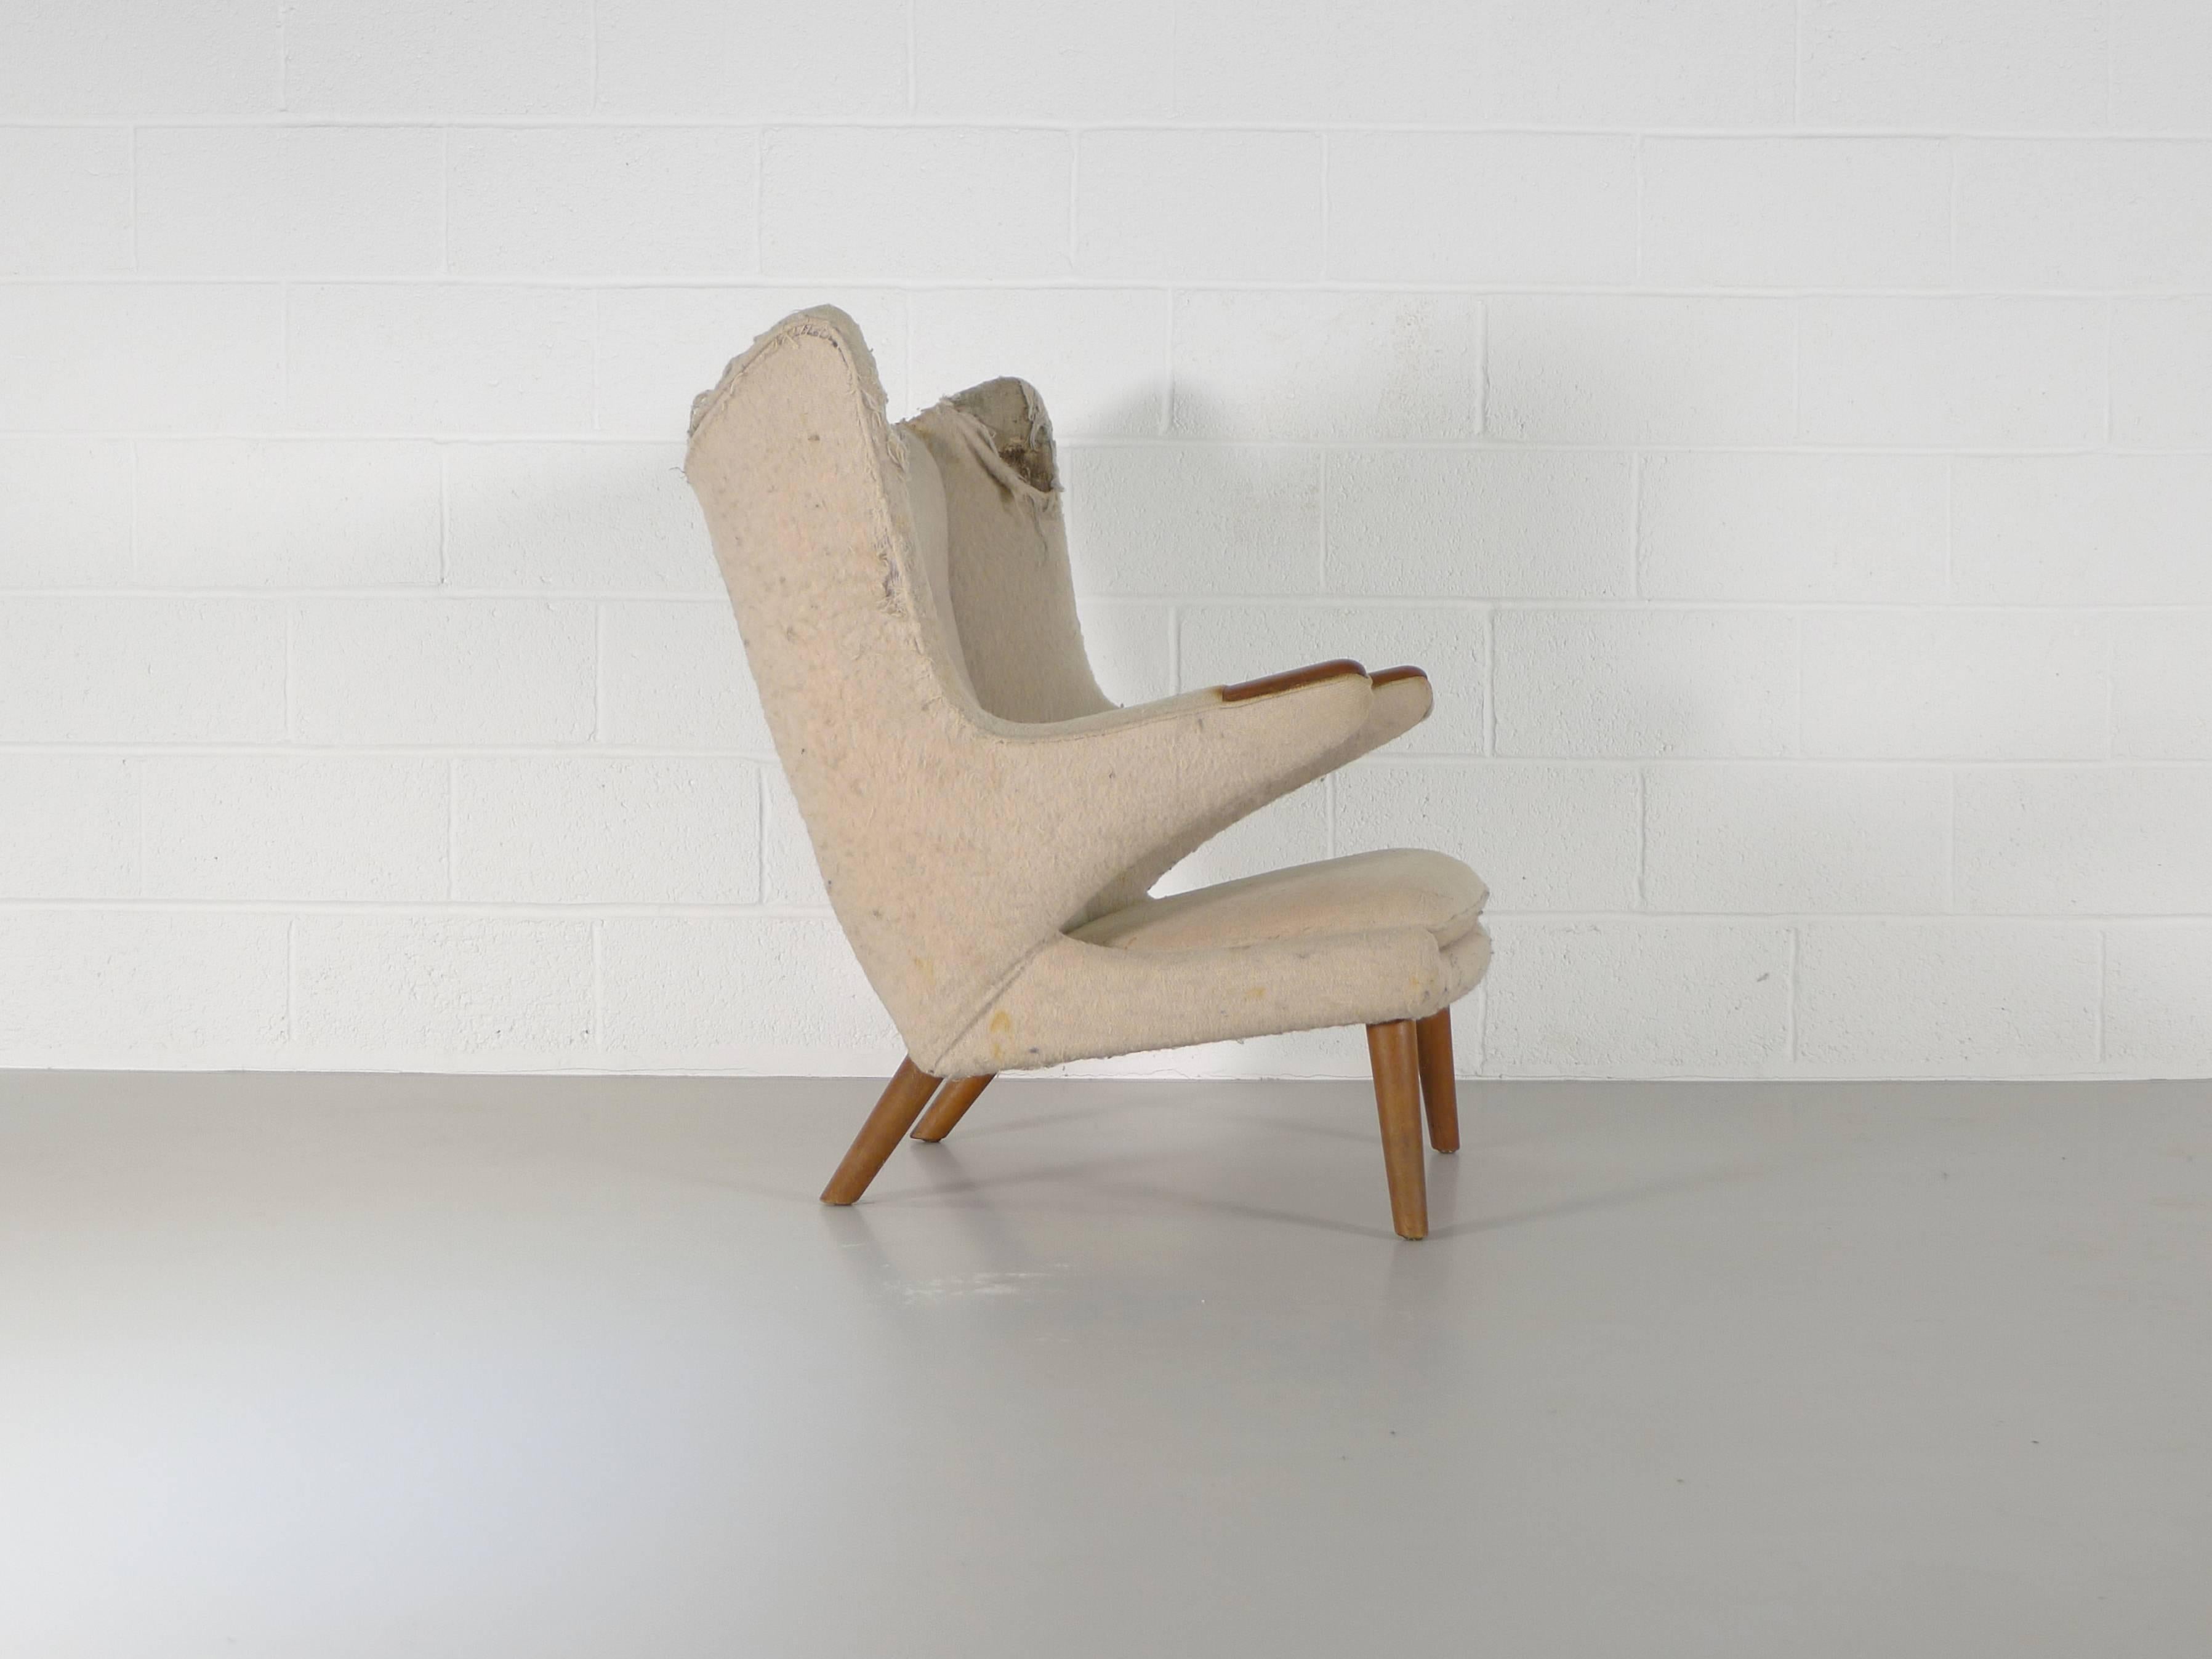 Hans Wegner for Johannes Hansen / A P Stolen, Denmark, 1950. A Papa Bear chair, structurally sound with nice teak paws. In need of re-upholstery to suit your taste and decor. From the same house as the AP 27 chair we also have listed and in similar